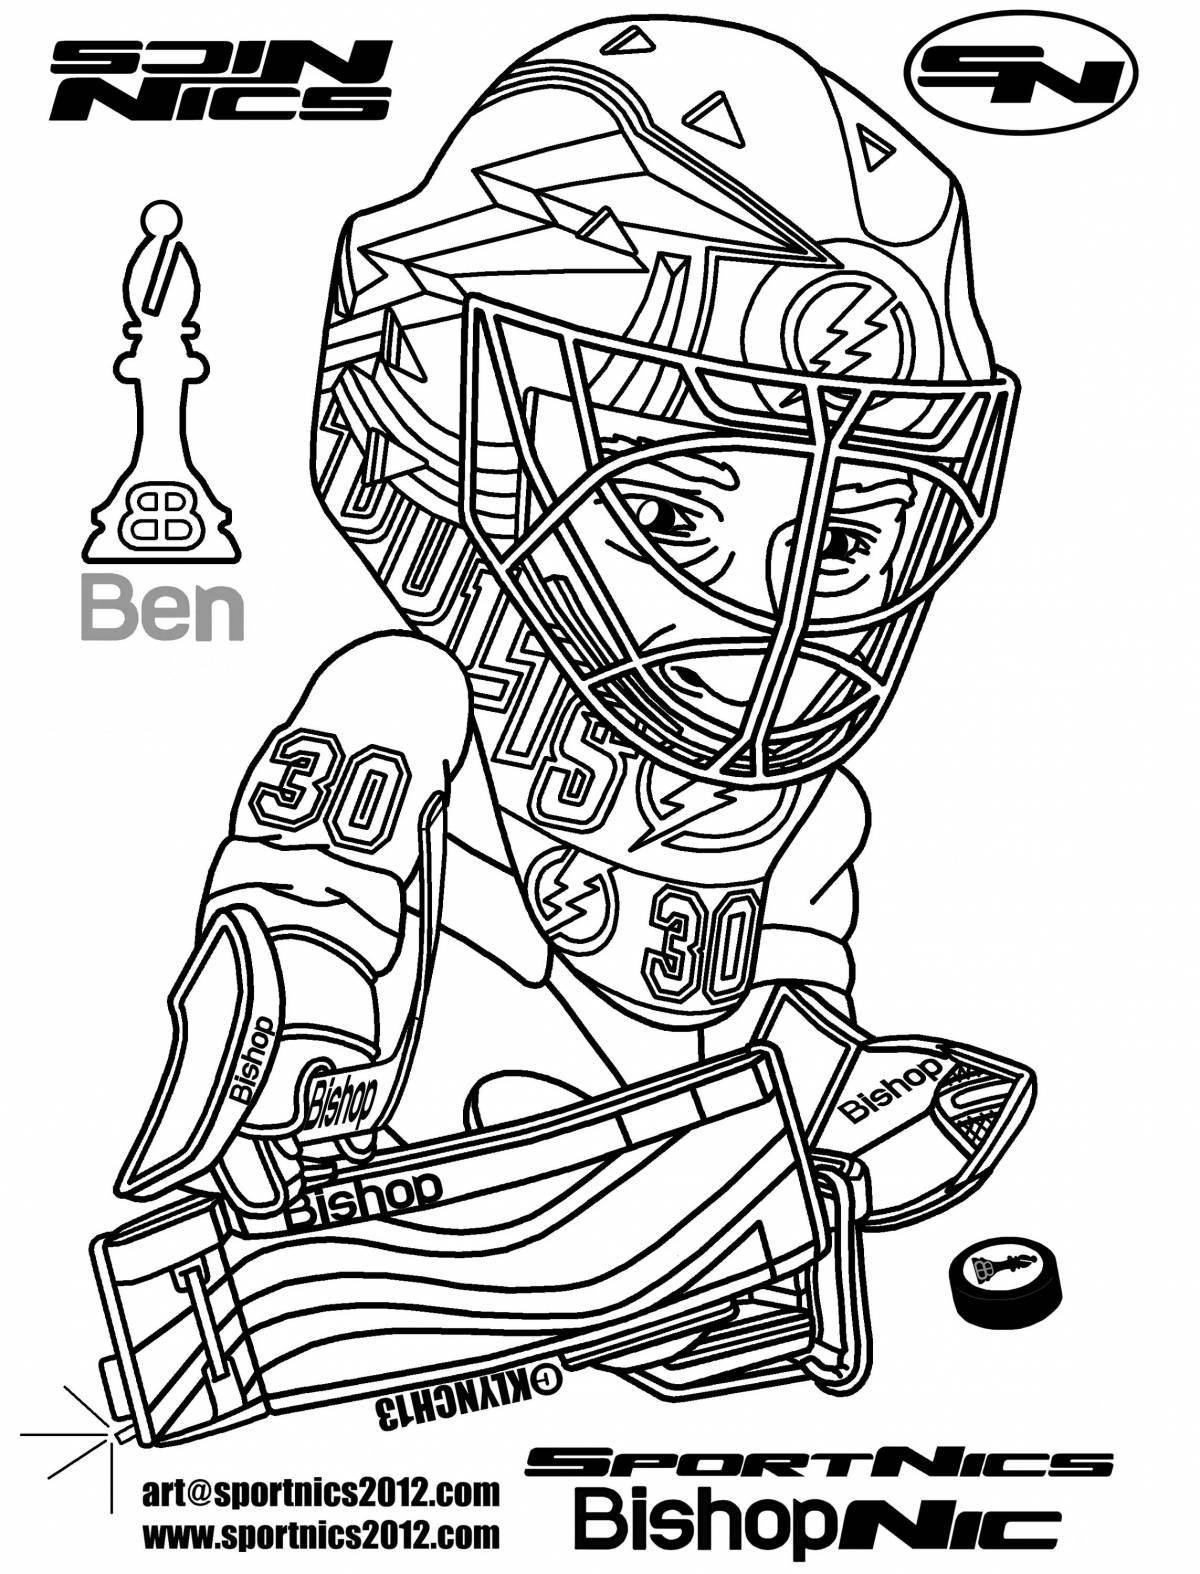 Radiant hockey nhl coloring page